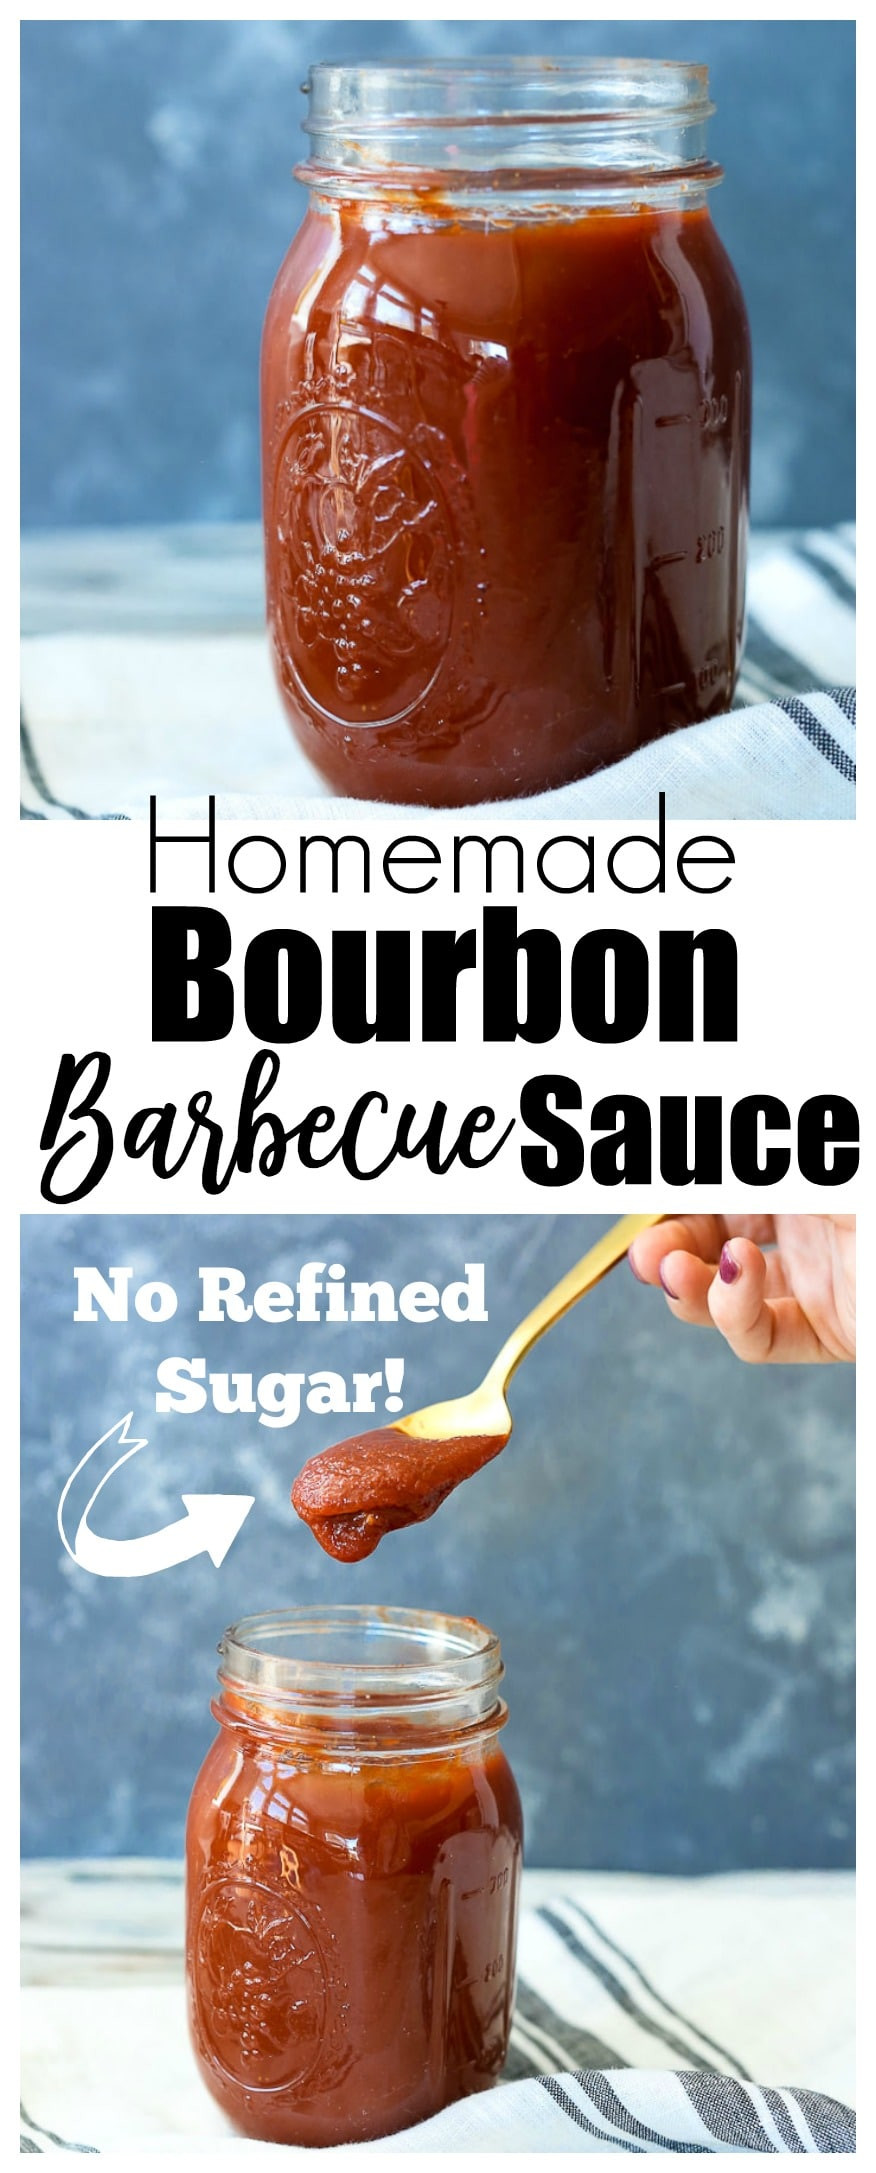 Bbq Sauce without Sugar New Homemade Bourbon Barbecue Sauce without Refined Sugar